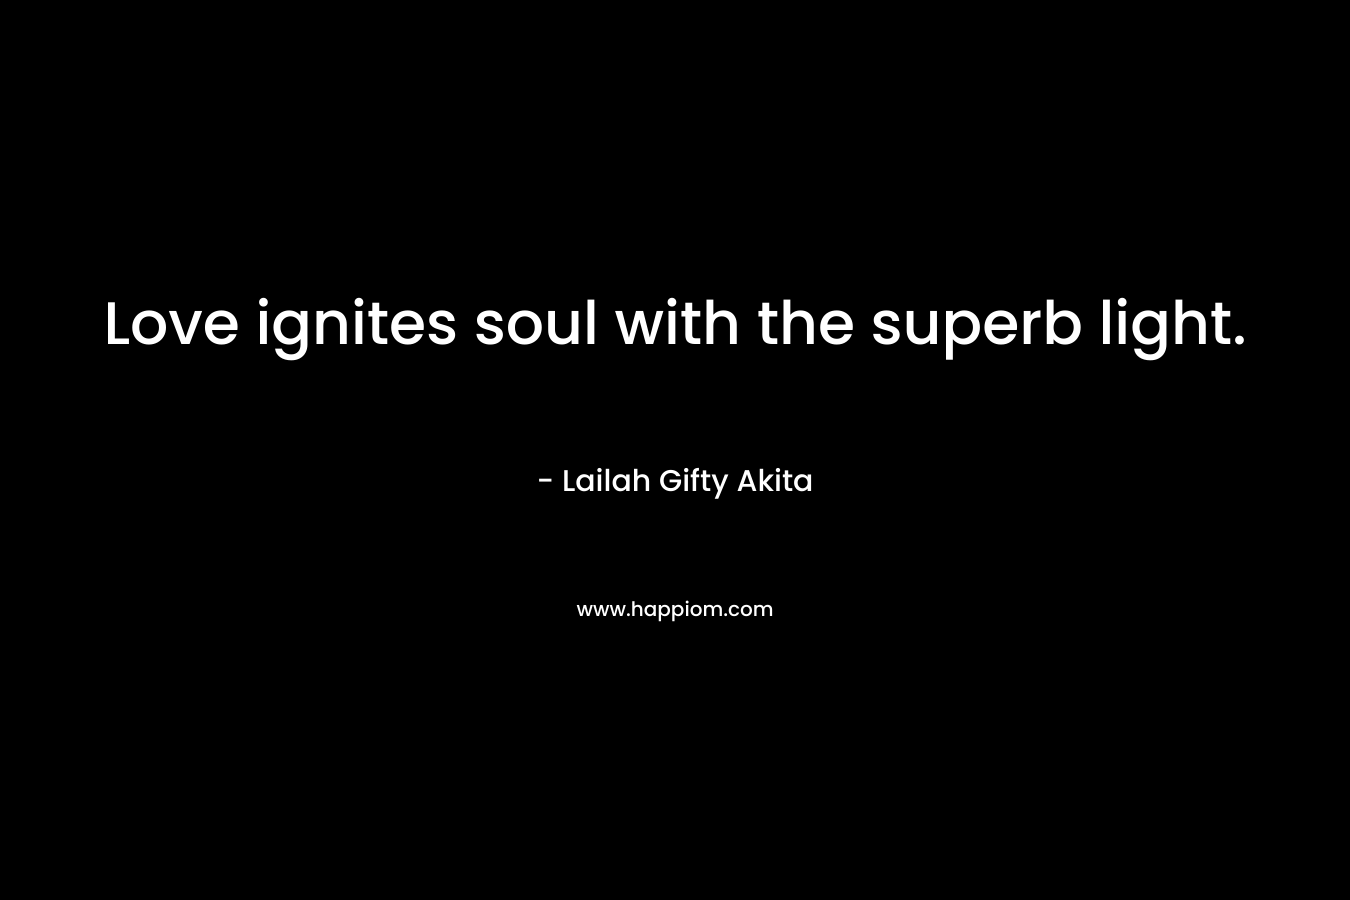 Love ignites soul with the superb light.